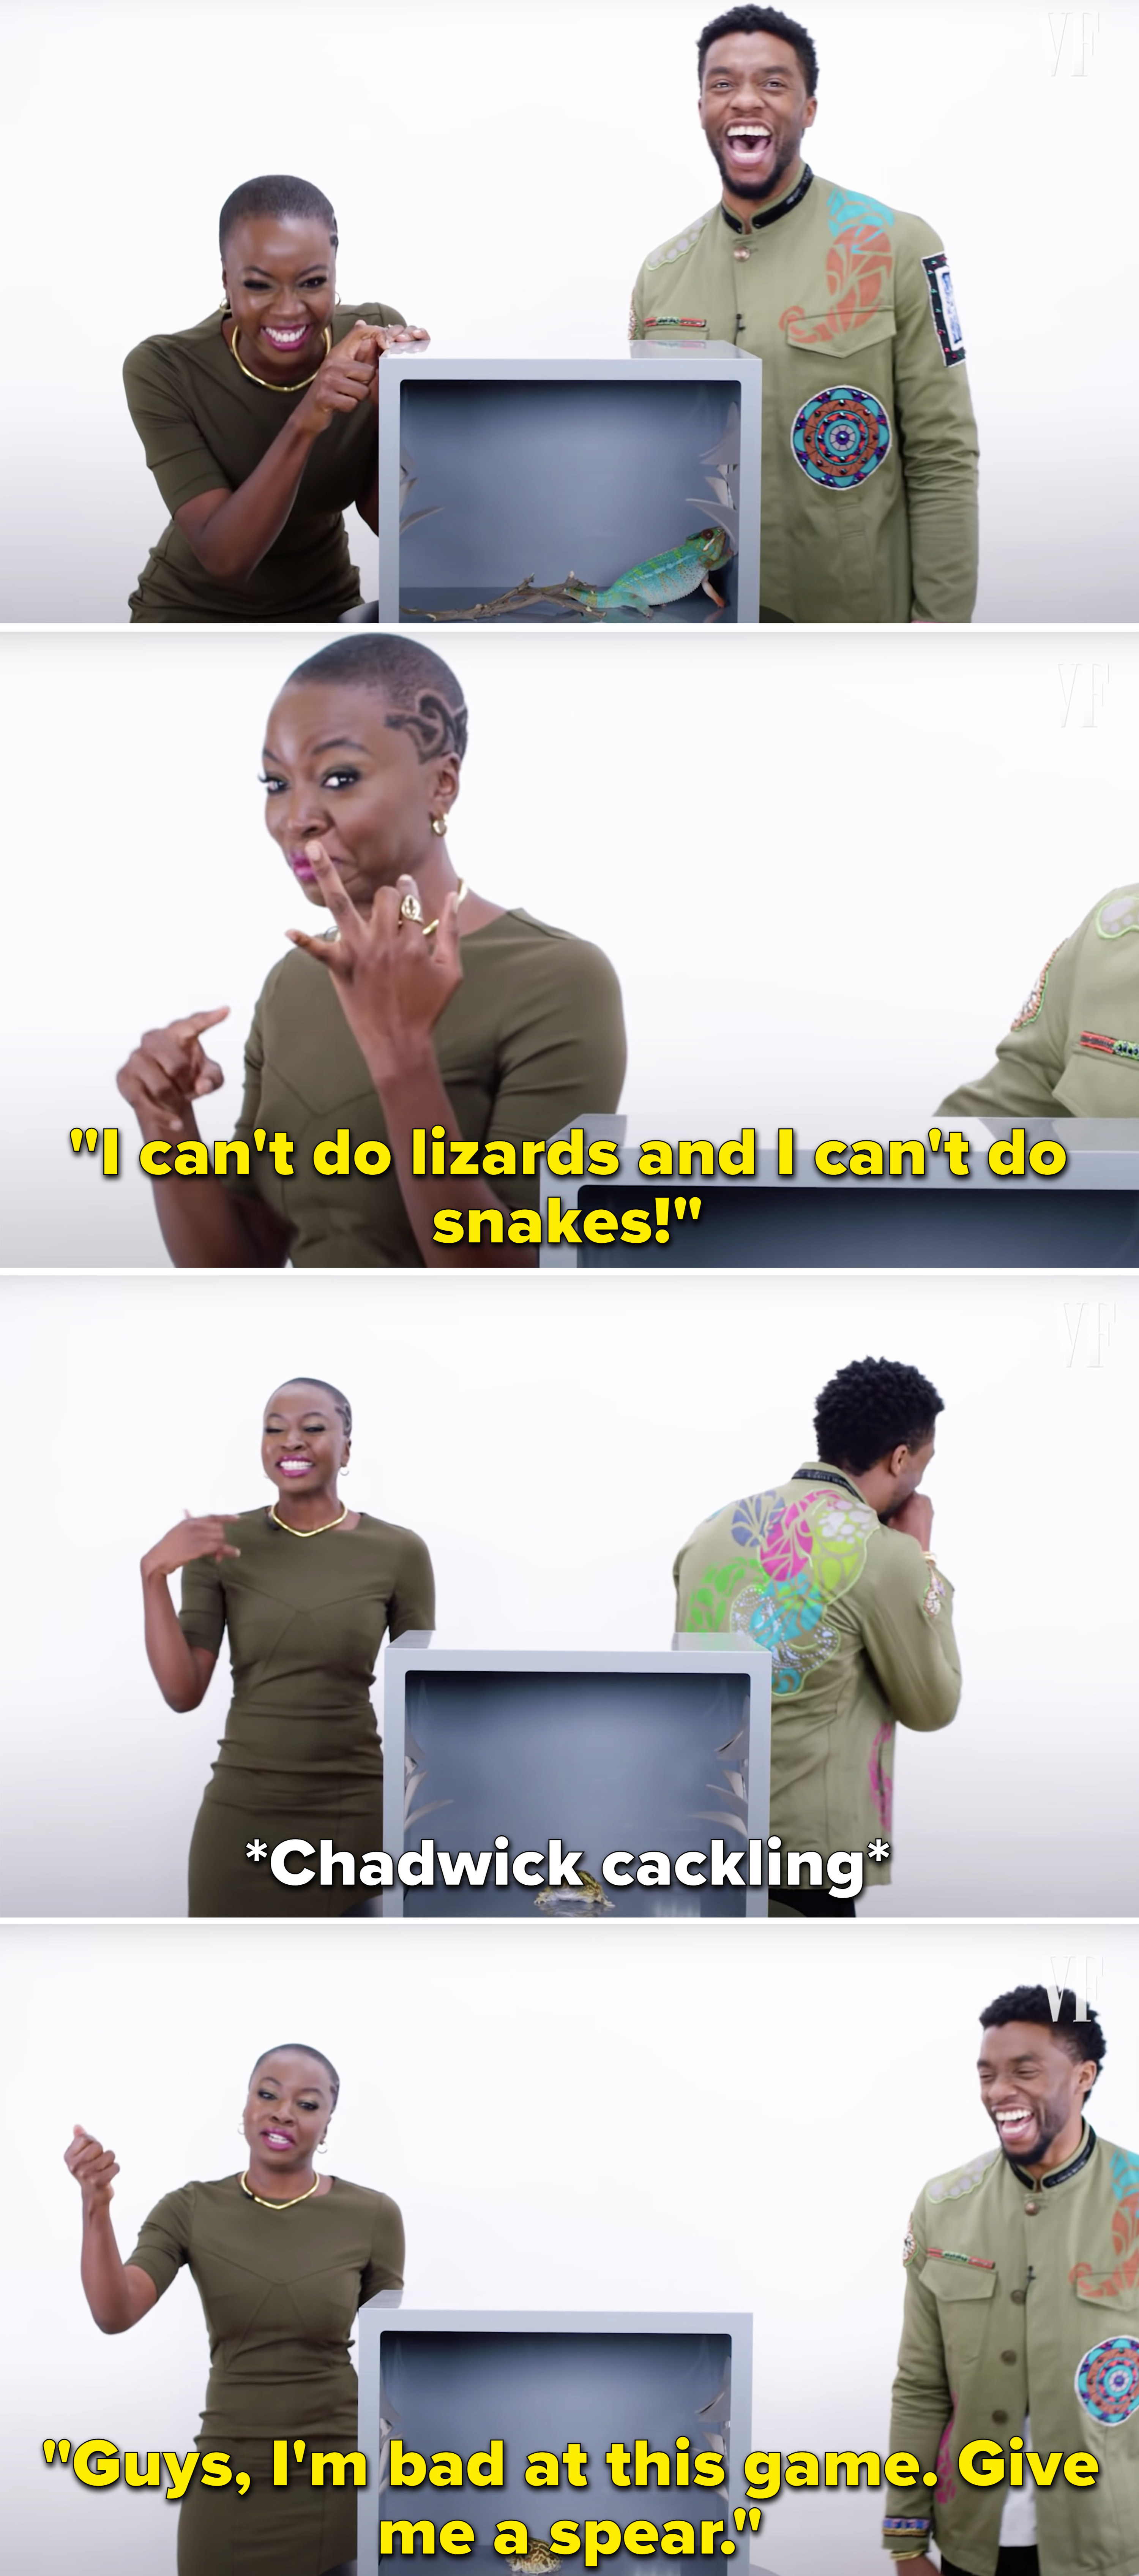 Chadwick laughing while Danai explains she hates lizards and snakes